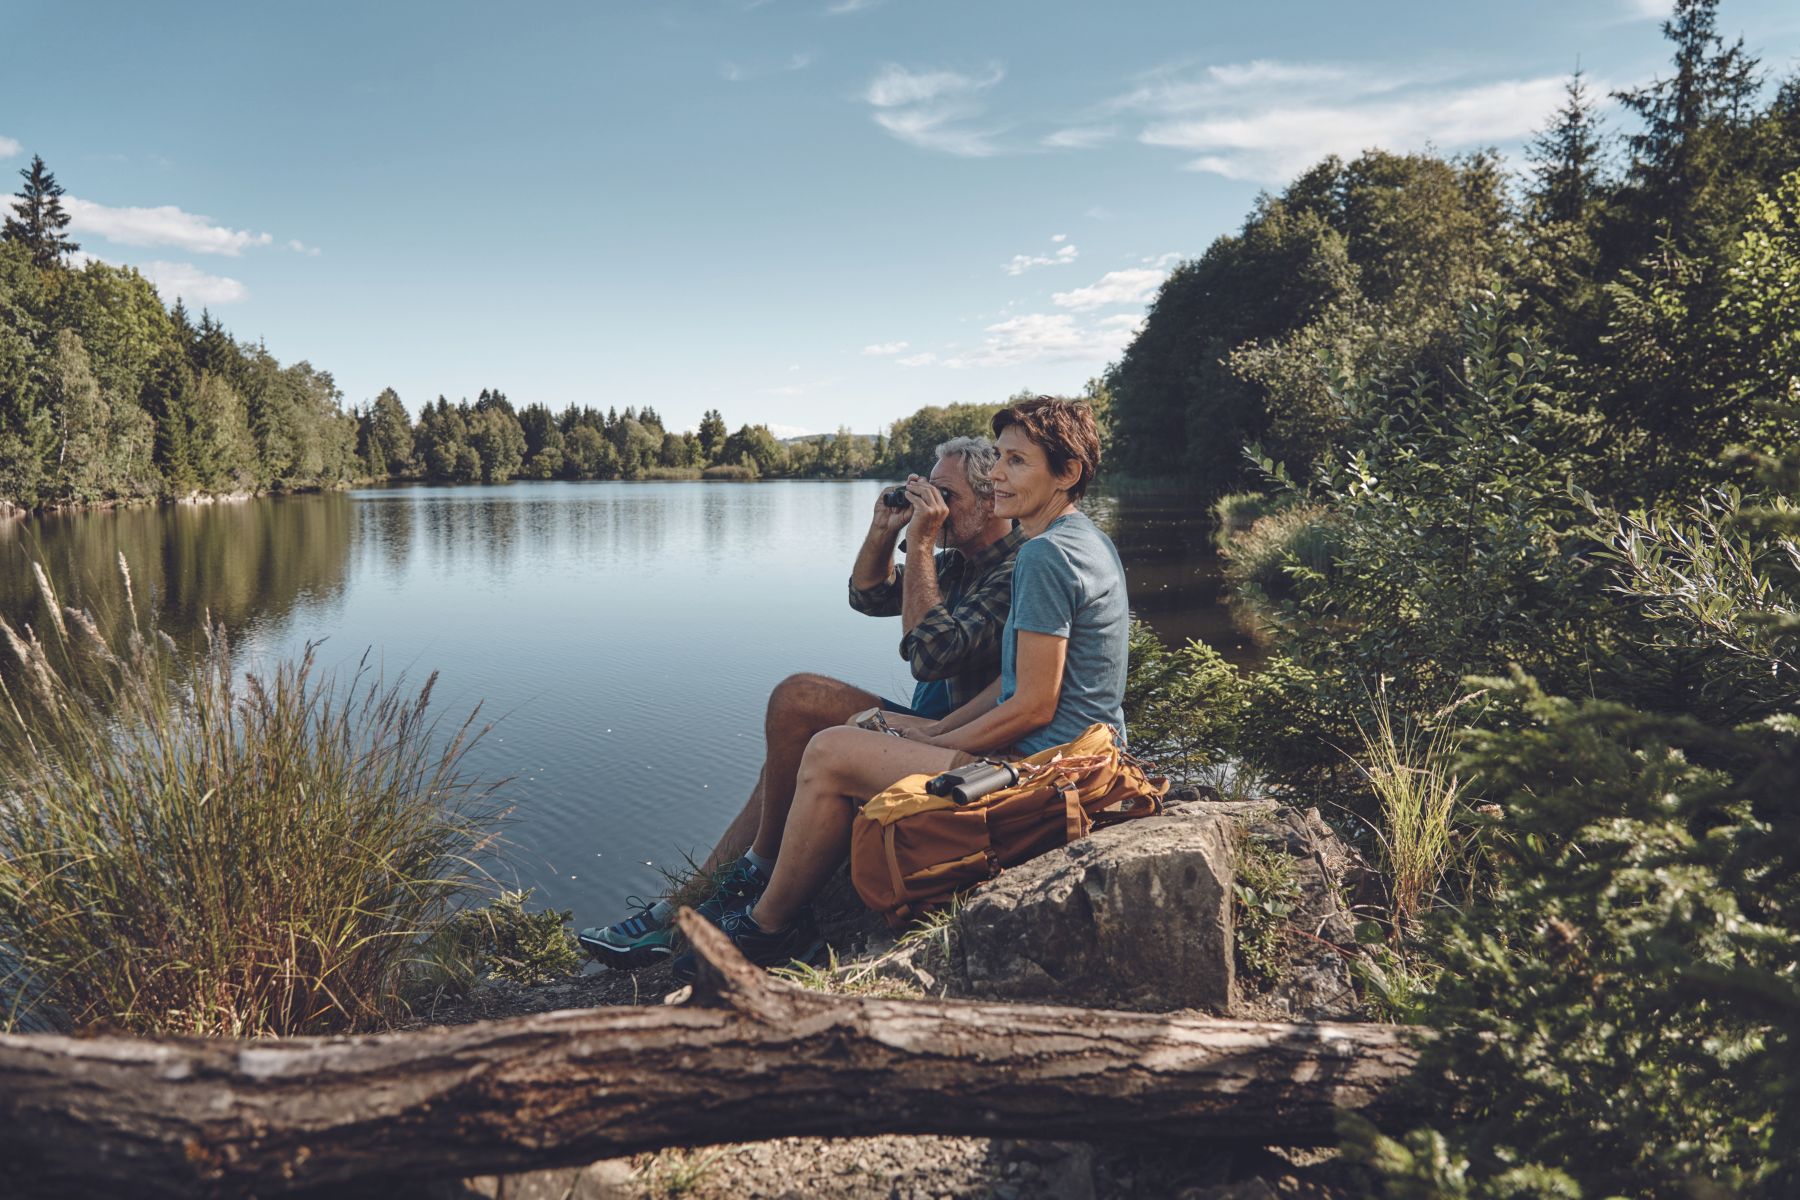 A couple sitting by a river or lake using binoculars.